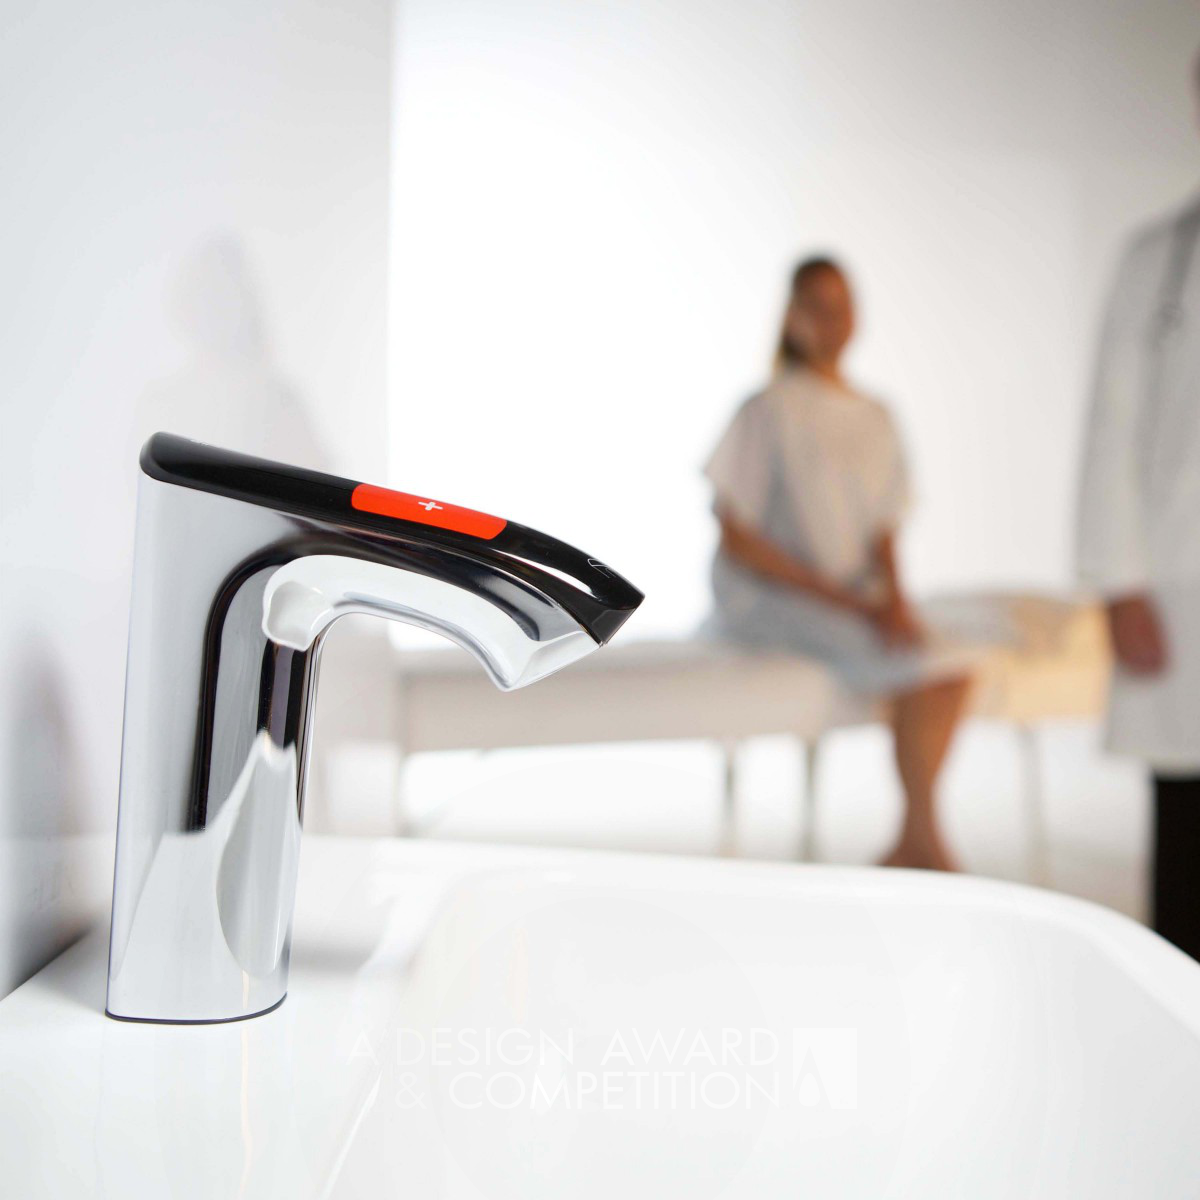 Intelligent Care Healthcare Taps & Showers by Ian Thompson